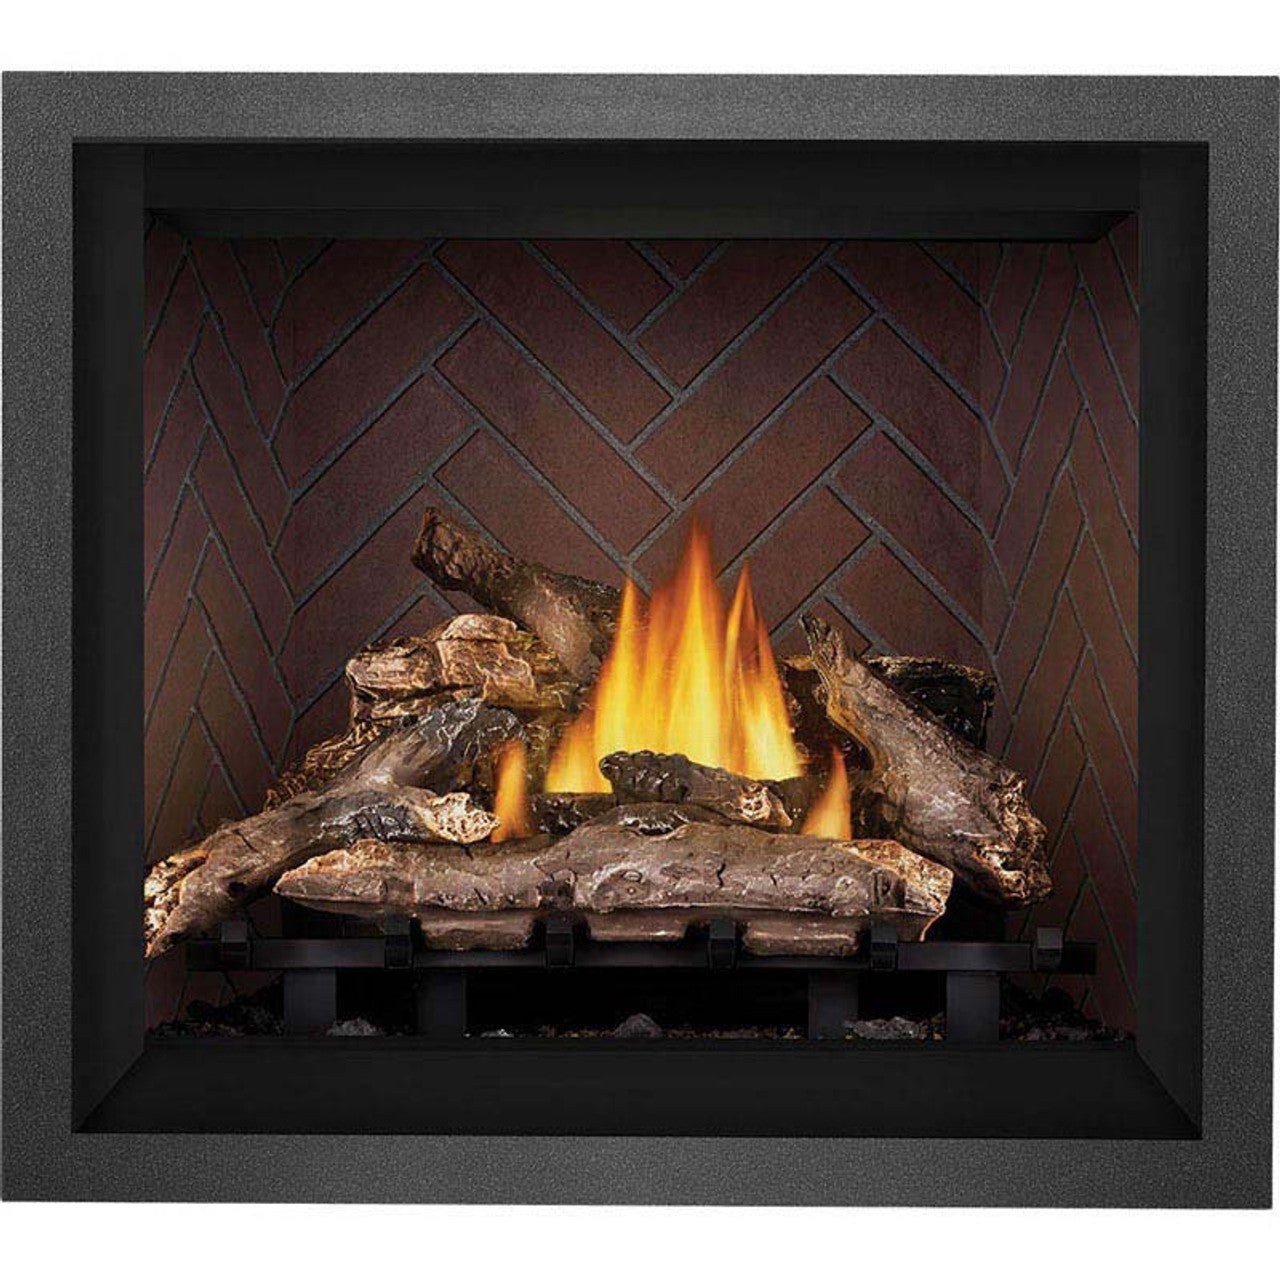 Napoleon Elevation 42 Direct Vent 36" Natural Gas Fireplace - E42NTE - Chimney Cricket